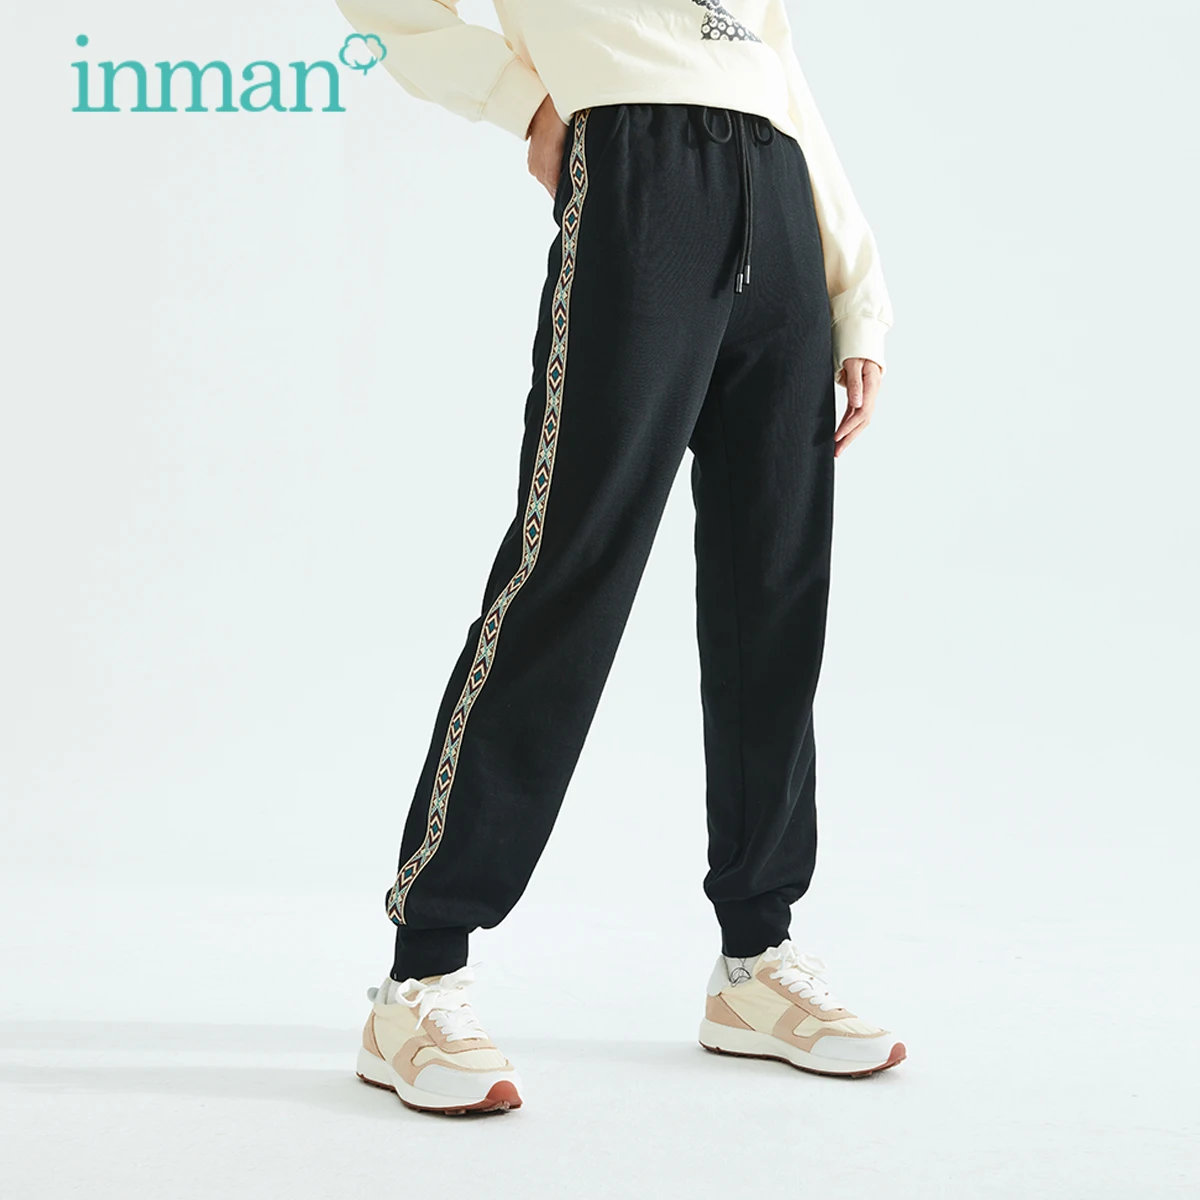 

INMAN Autumn Winter Causal Jogger Pants Women Girl Chinese Lucky Pattern Gril Sport Style Eleastic Wasit Trousers